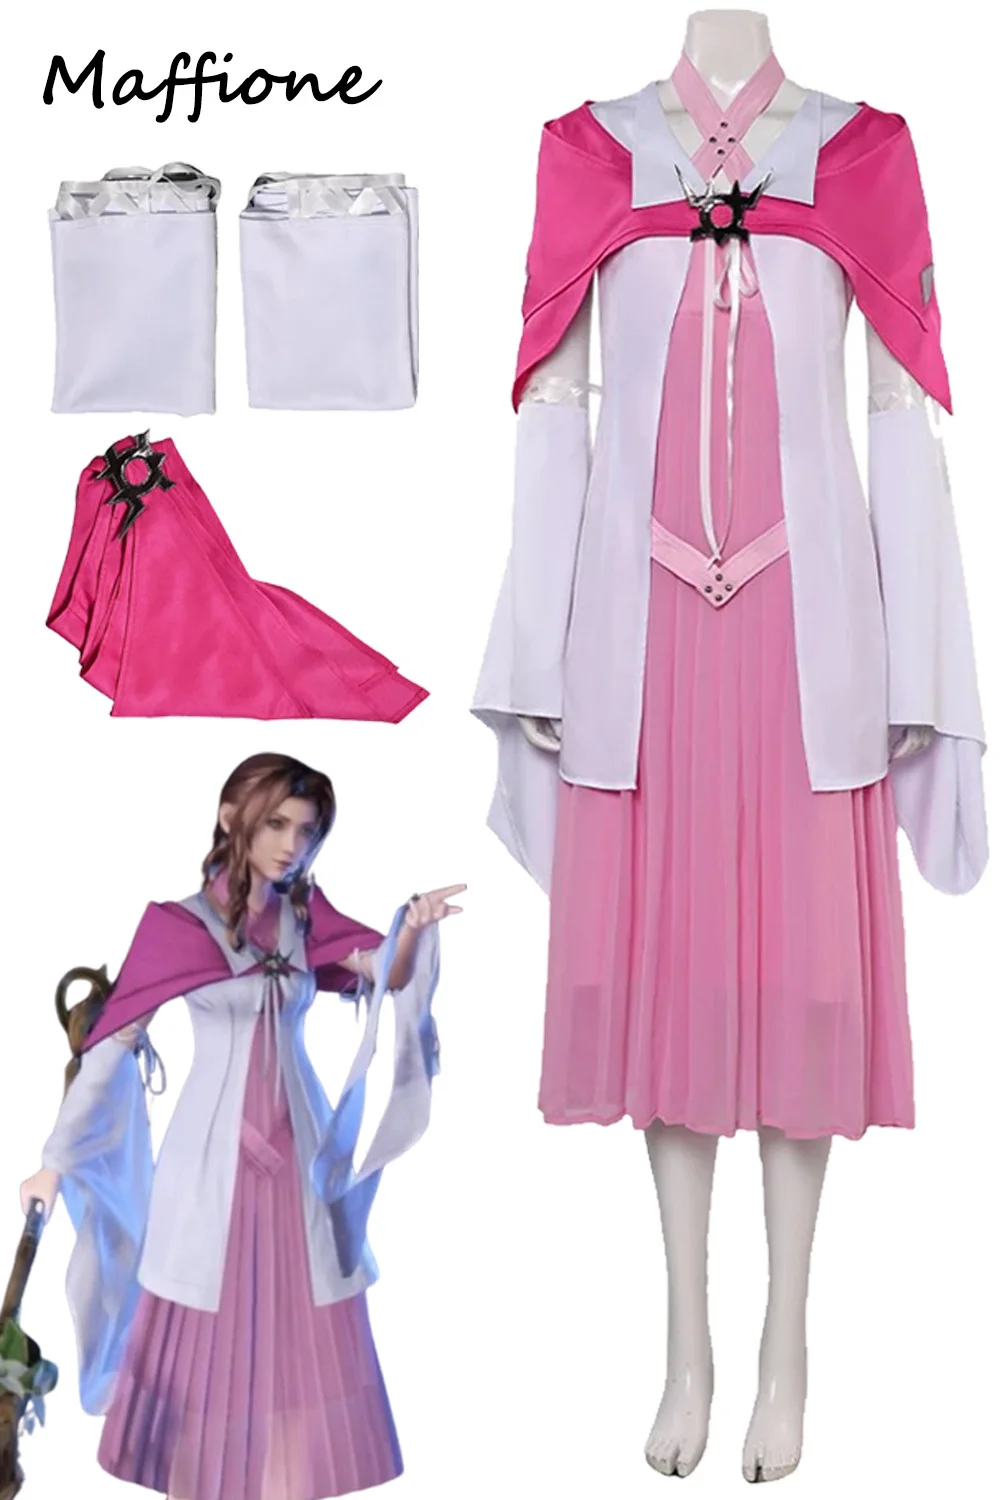 

Alice Cosplay New Pink Costume Anime Game Final Cosplay Fantasy VII Rebirth Roleplay Shawl Sleeve Outfits Women Halloween Suits